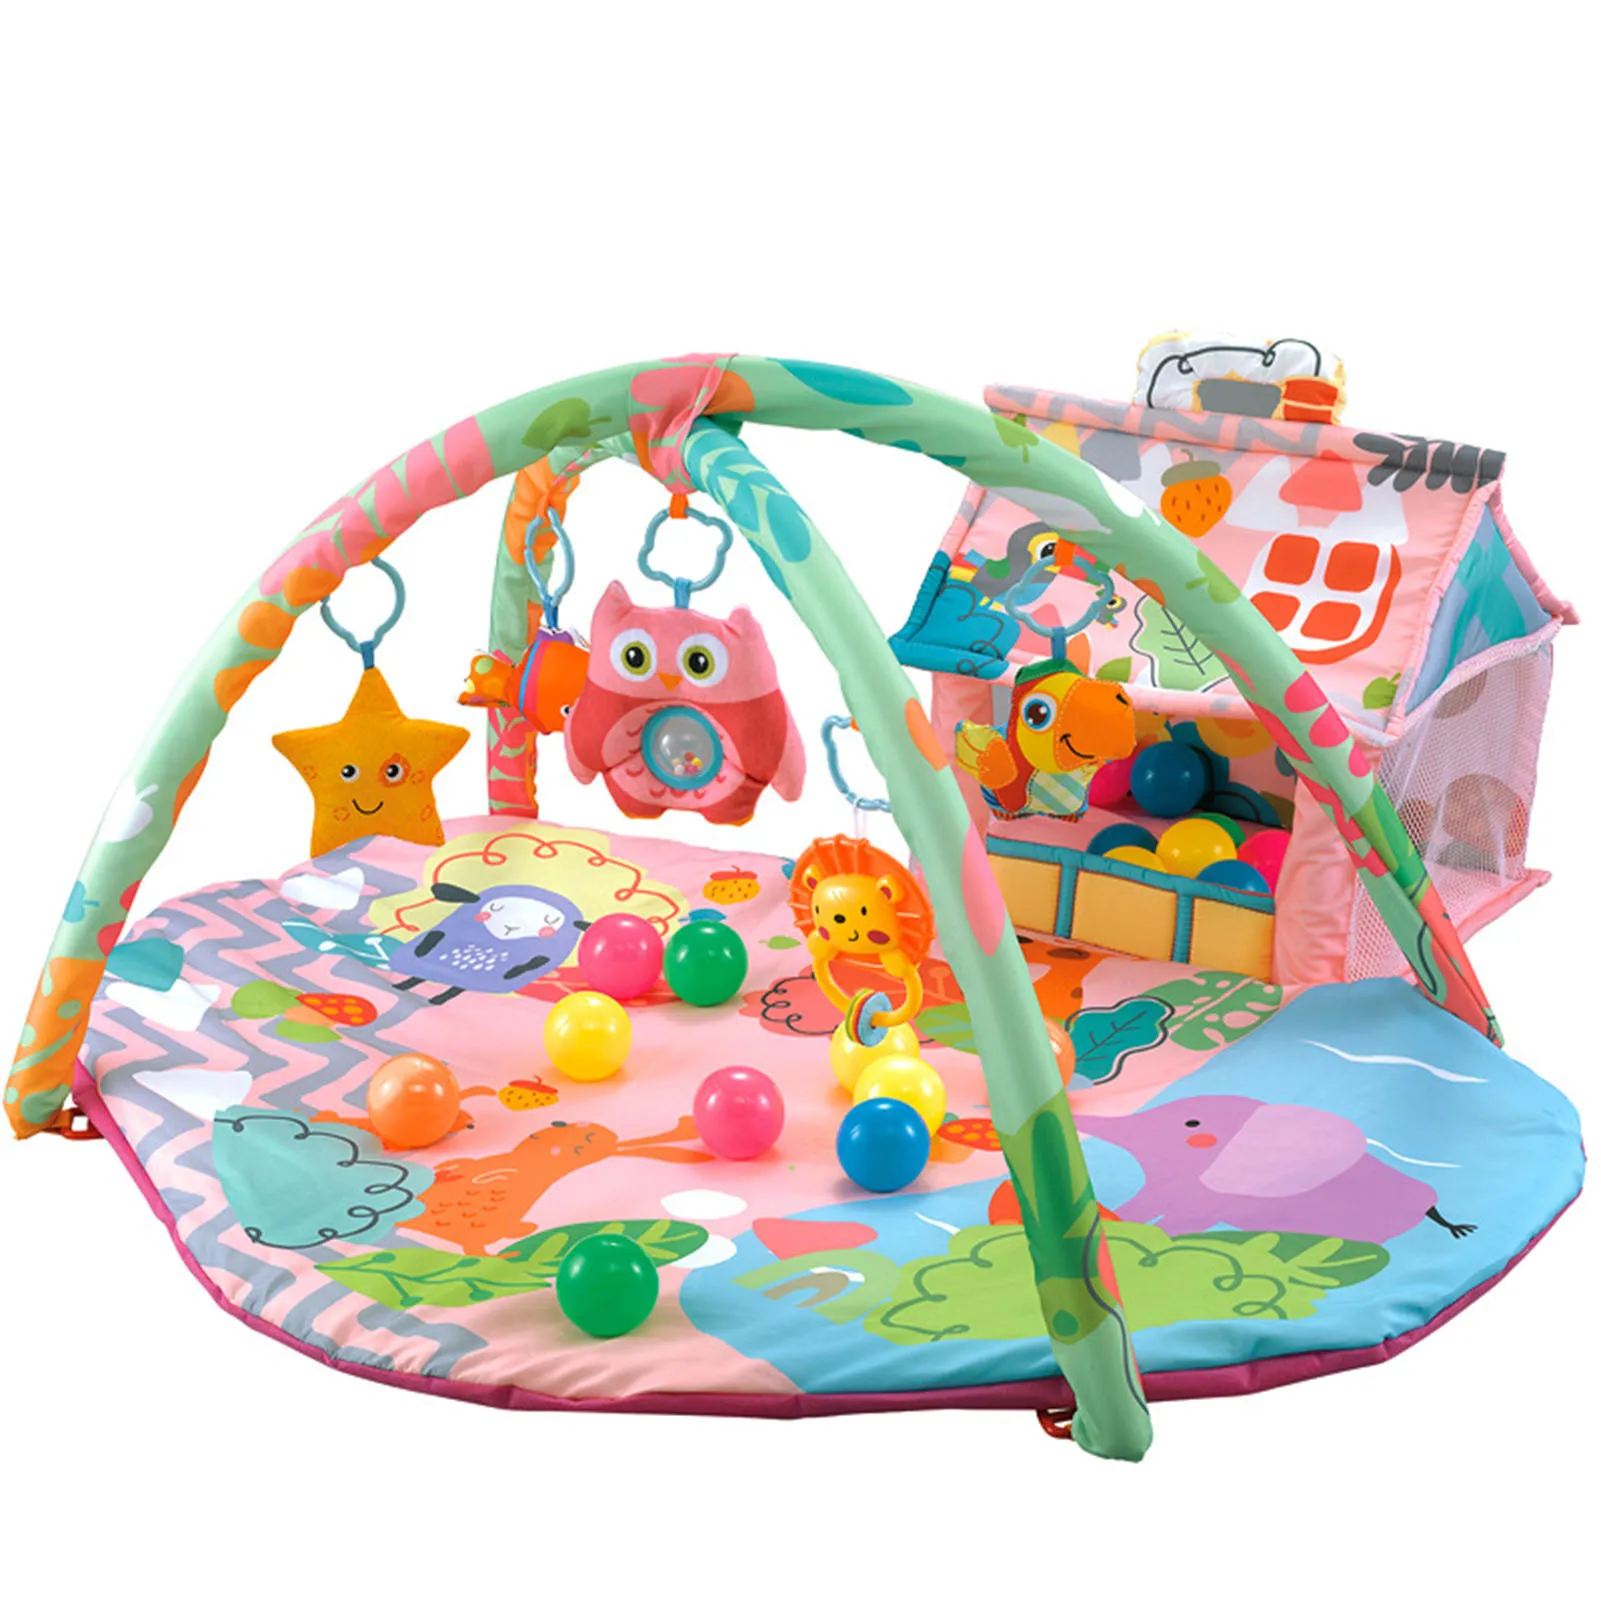 

Jumbo Kid Activity Gym Small House Fitness Mat With 5 Detachable Toys Skin-Friendly Early Development Playmats With 5 Detachable